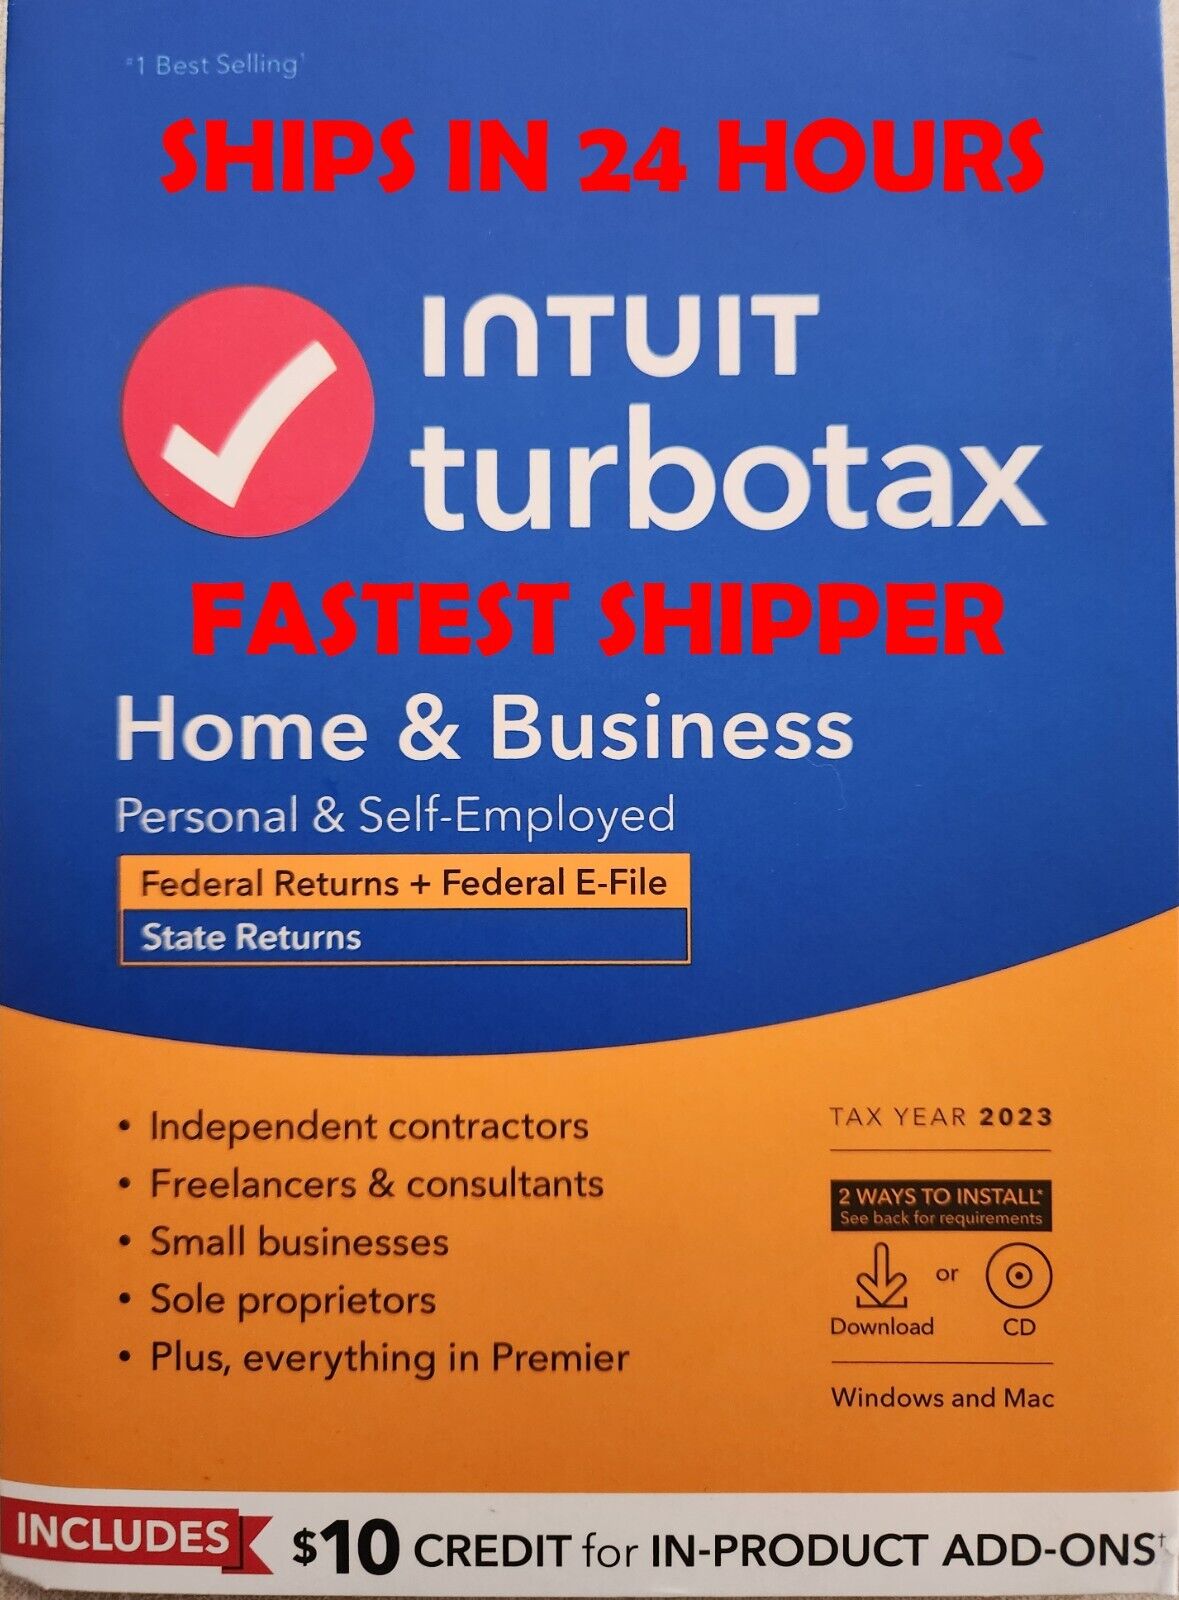 TurboTax Home & Business 2023 Federal+E-file+State_Windows/Mac CD - Ships in 24